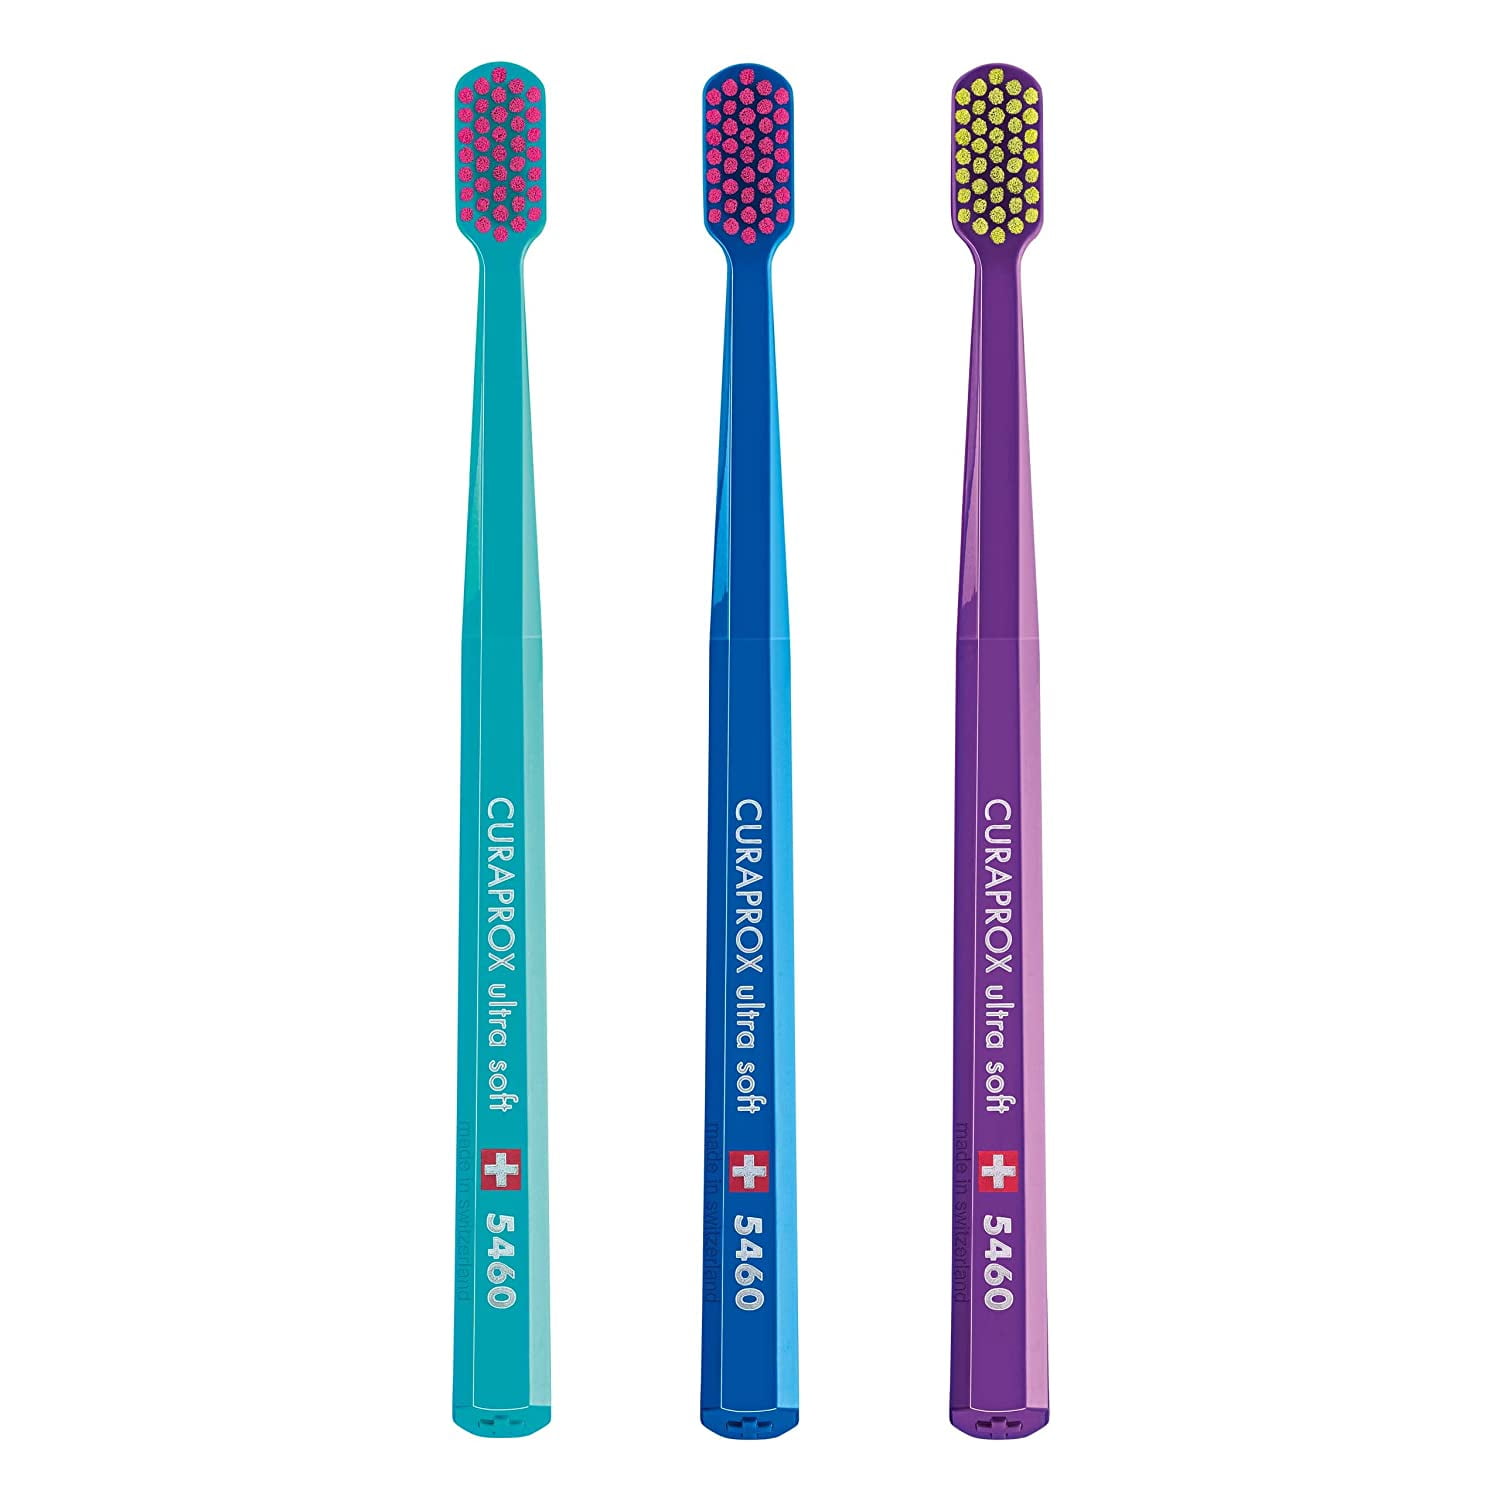 Curaprox CS 5460 Ultra-Soft Toothbrush (Pack of 3)